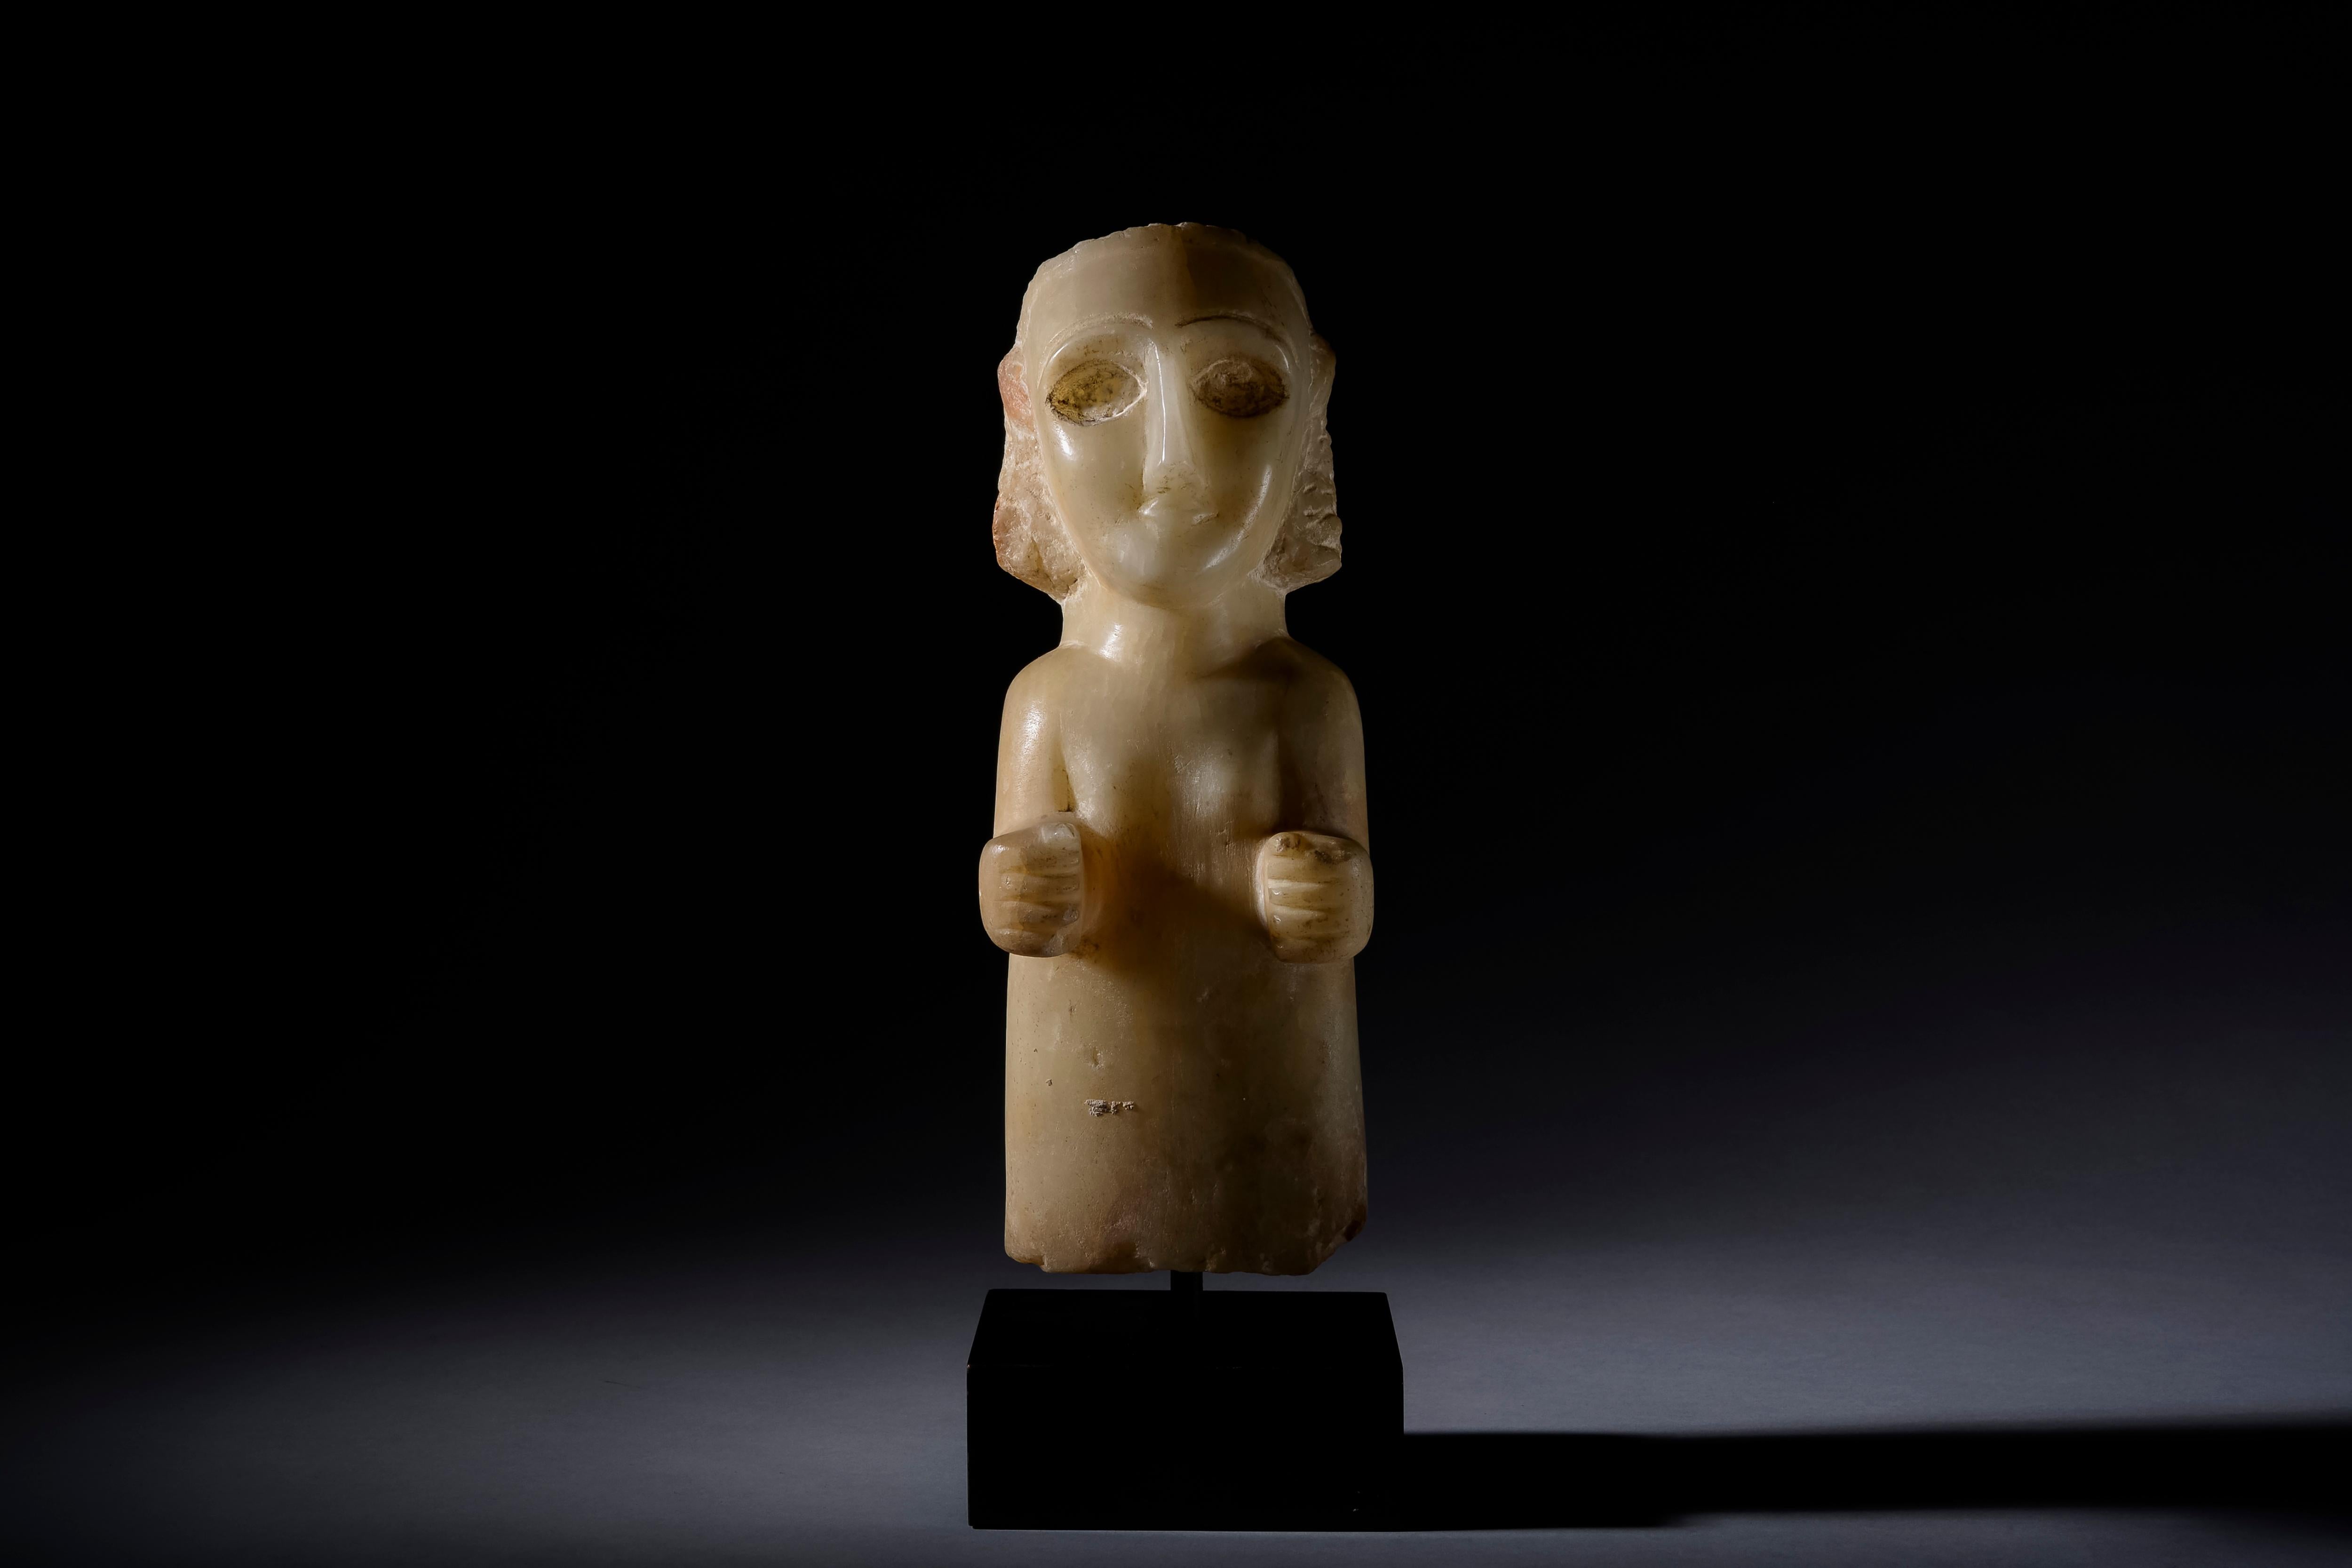 South Arabian Calcite female figure
3rd Century BC to 1st century A.D.
Calcite Alabaster
height: 30.5 cm

A magnificent alabaster female figure, a fine example of the well-studied grace that characterises South Arabian art. The figure is